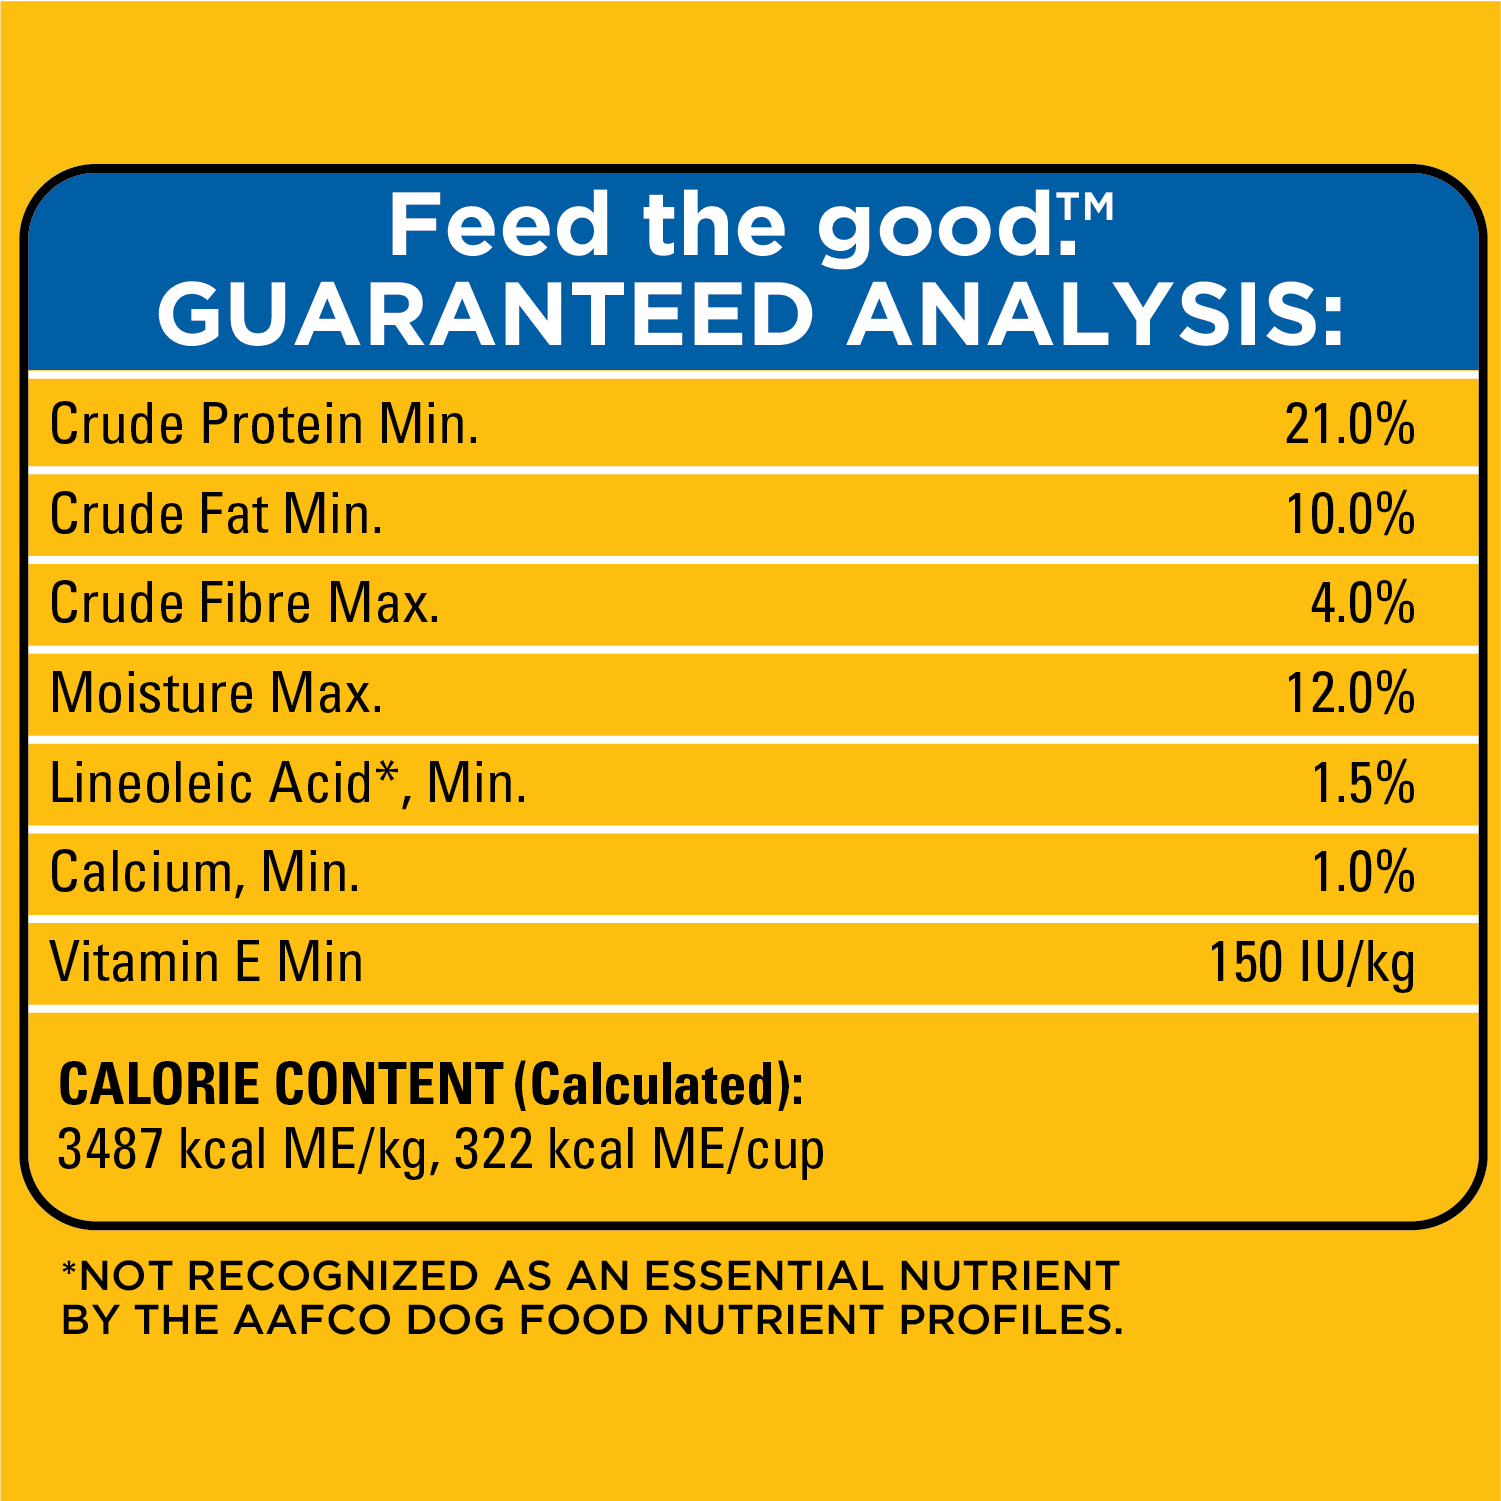 PEDIGREE® VITALITY+ HEARTY BEEF & VEGETABLE FLAVOUR DRY DOG FOOD guaranteed analysis image